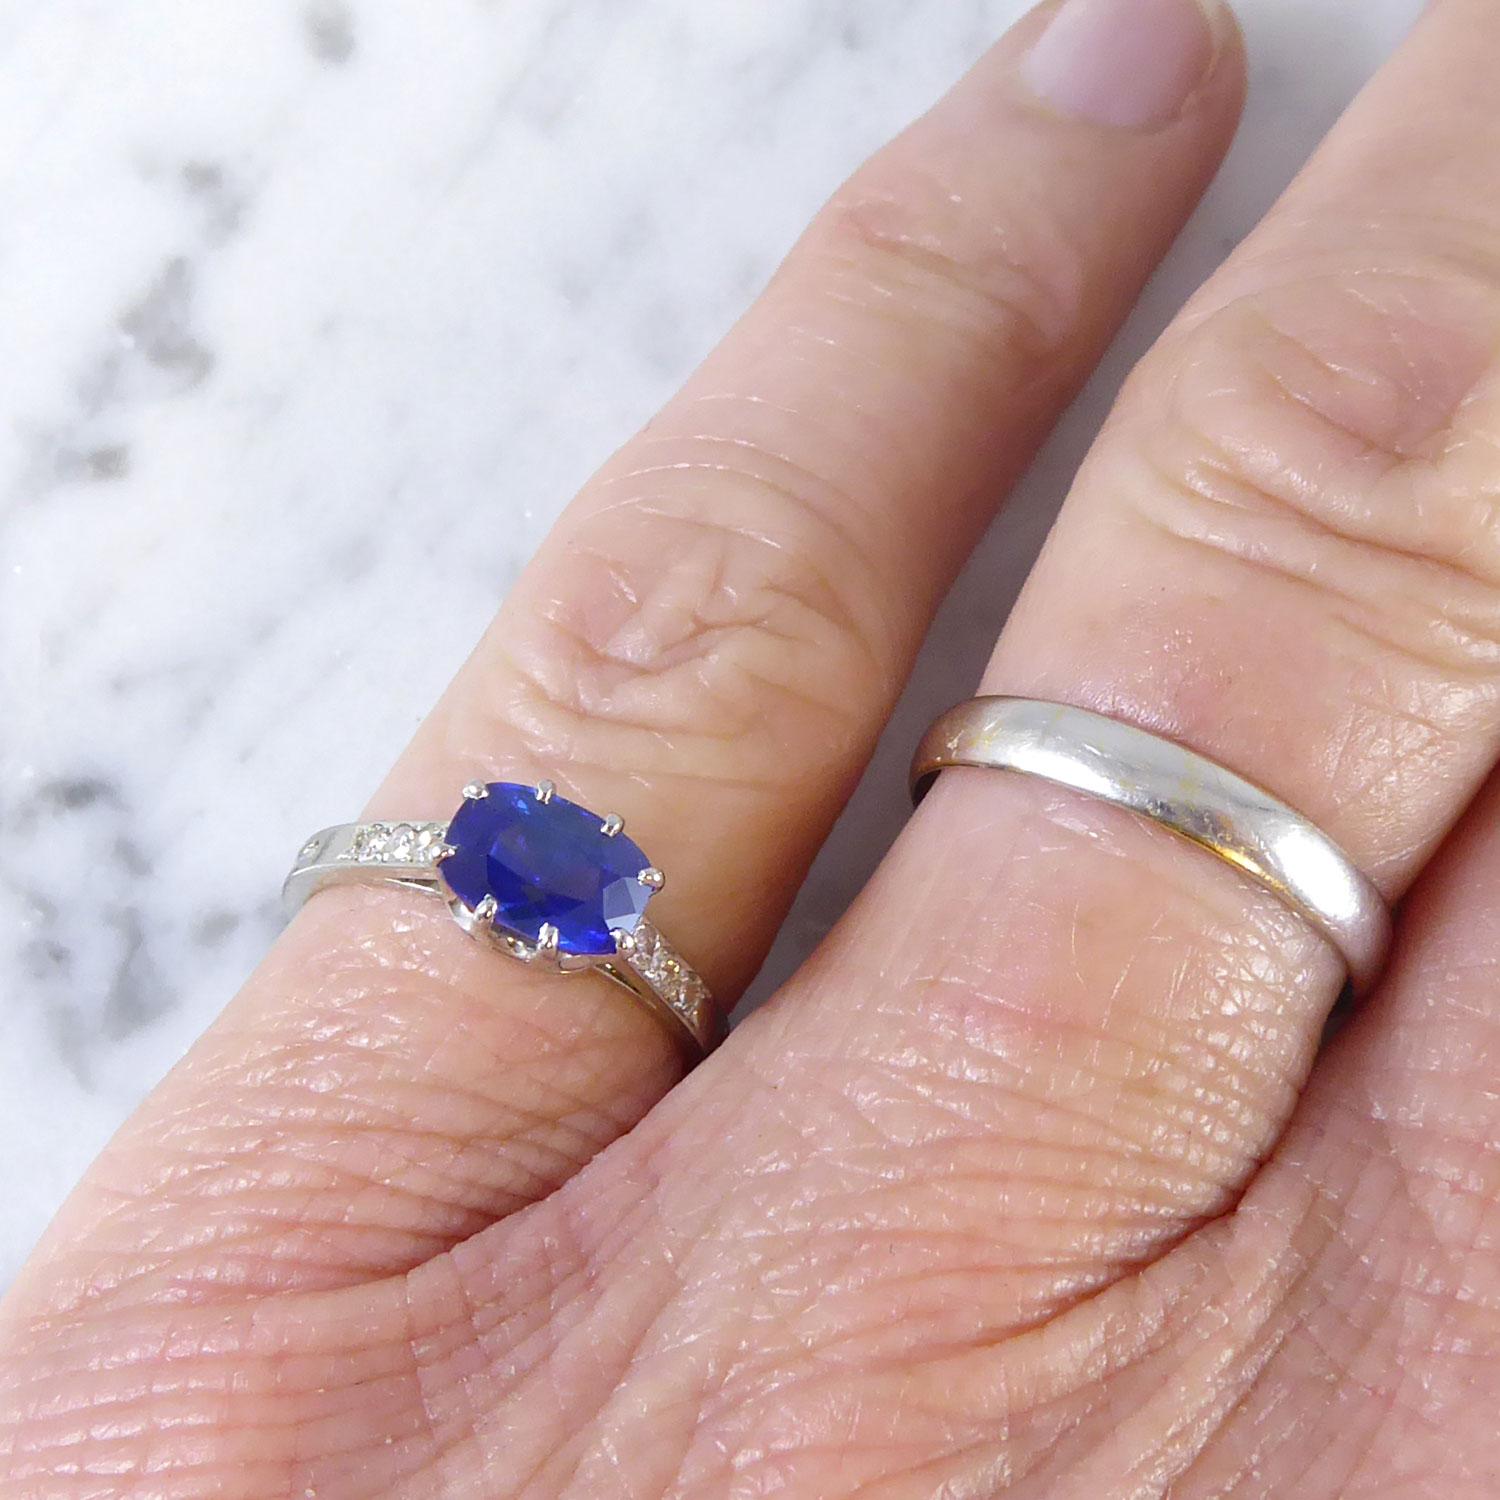 Contemporary 1.41 Carat Sapphire Ring with Diamond Set Shoulders, French 1